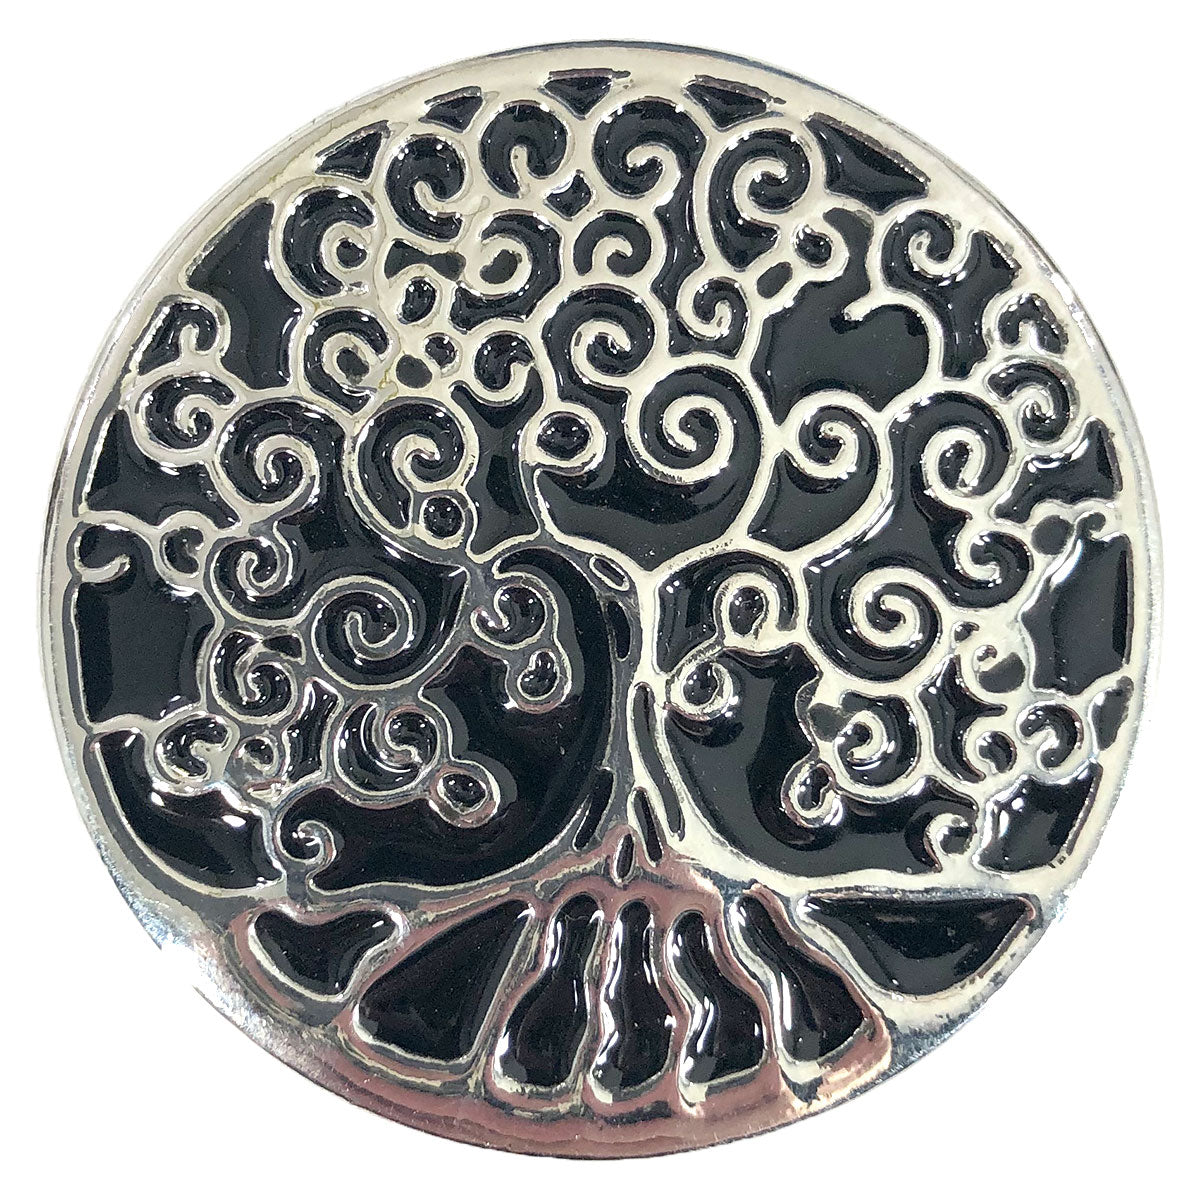 Silver tree of life over black enamel. Magnetic Brooch for Scarves Artistic Sculptural shapes add a personality to absolutely anything you wish to put your stamp on! The Super Strong Magnet is enough for a jacket lapel! Use to hold a sarong or cardigan together.  Great to adorn a hat or to hold a scarf in place with Fabric Safe Magnet.